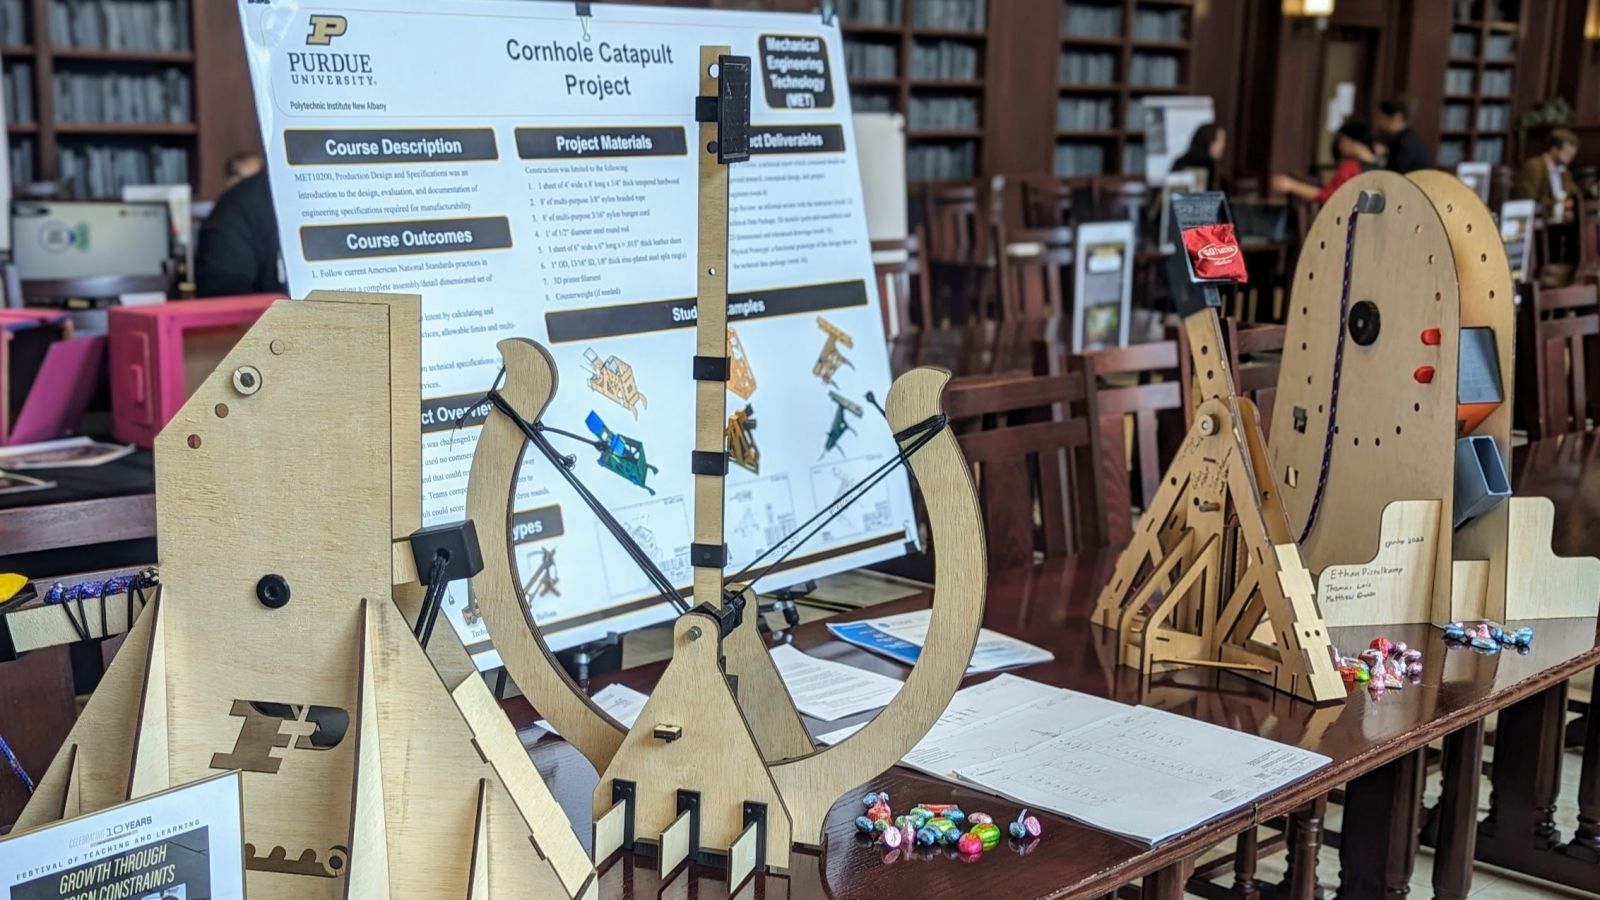 An example of a winning project from Purdue Polytechnic: Rustin Webster's catapult design. (Photo provided)